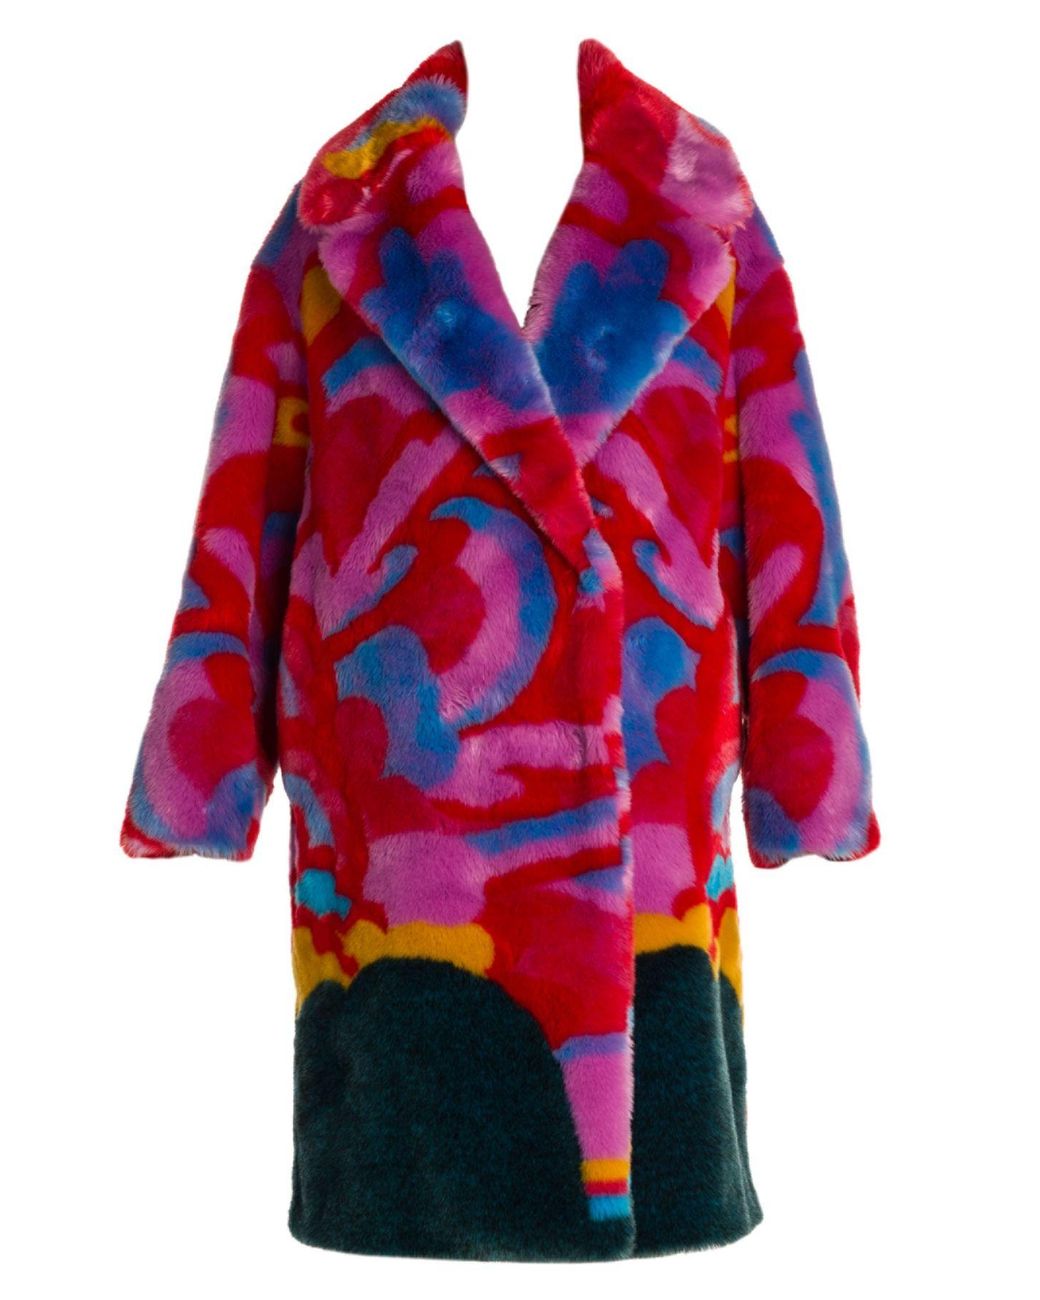 Stella McCartney The Beatles Yellow Submarine Faux Fur Coat In Pink | Lyst